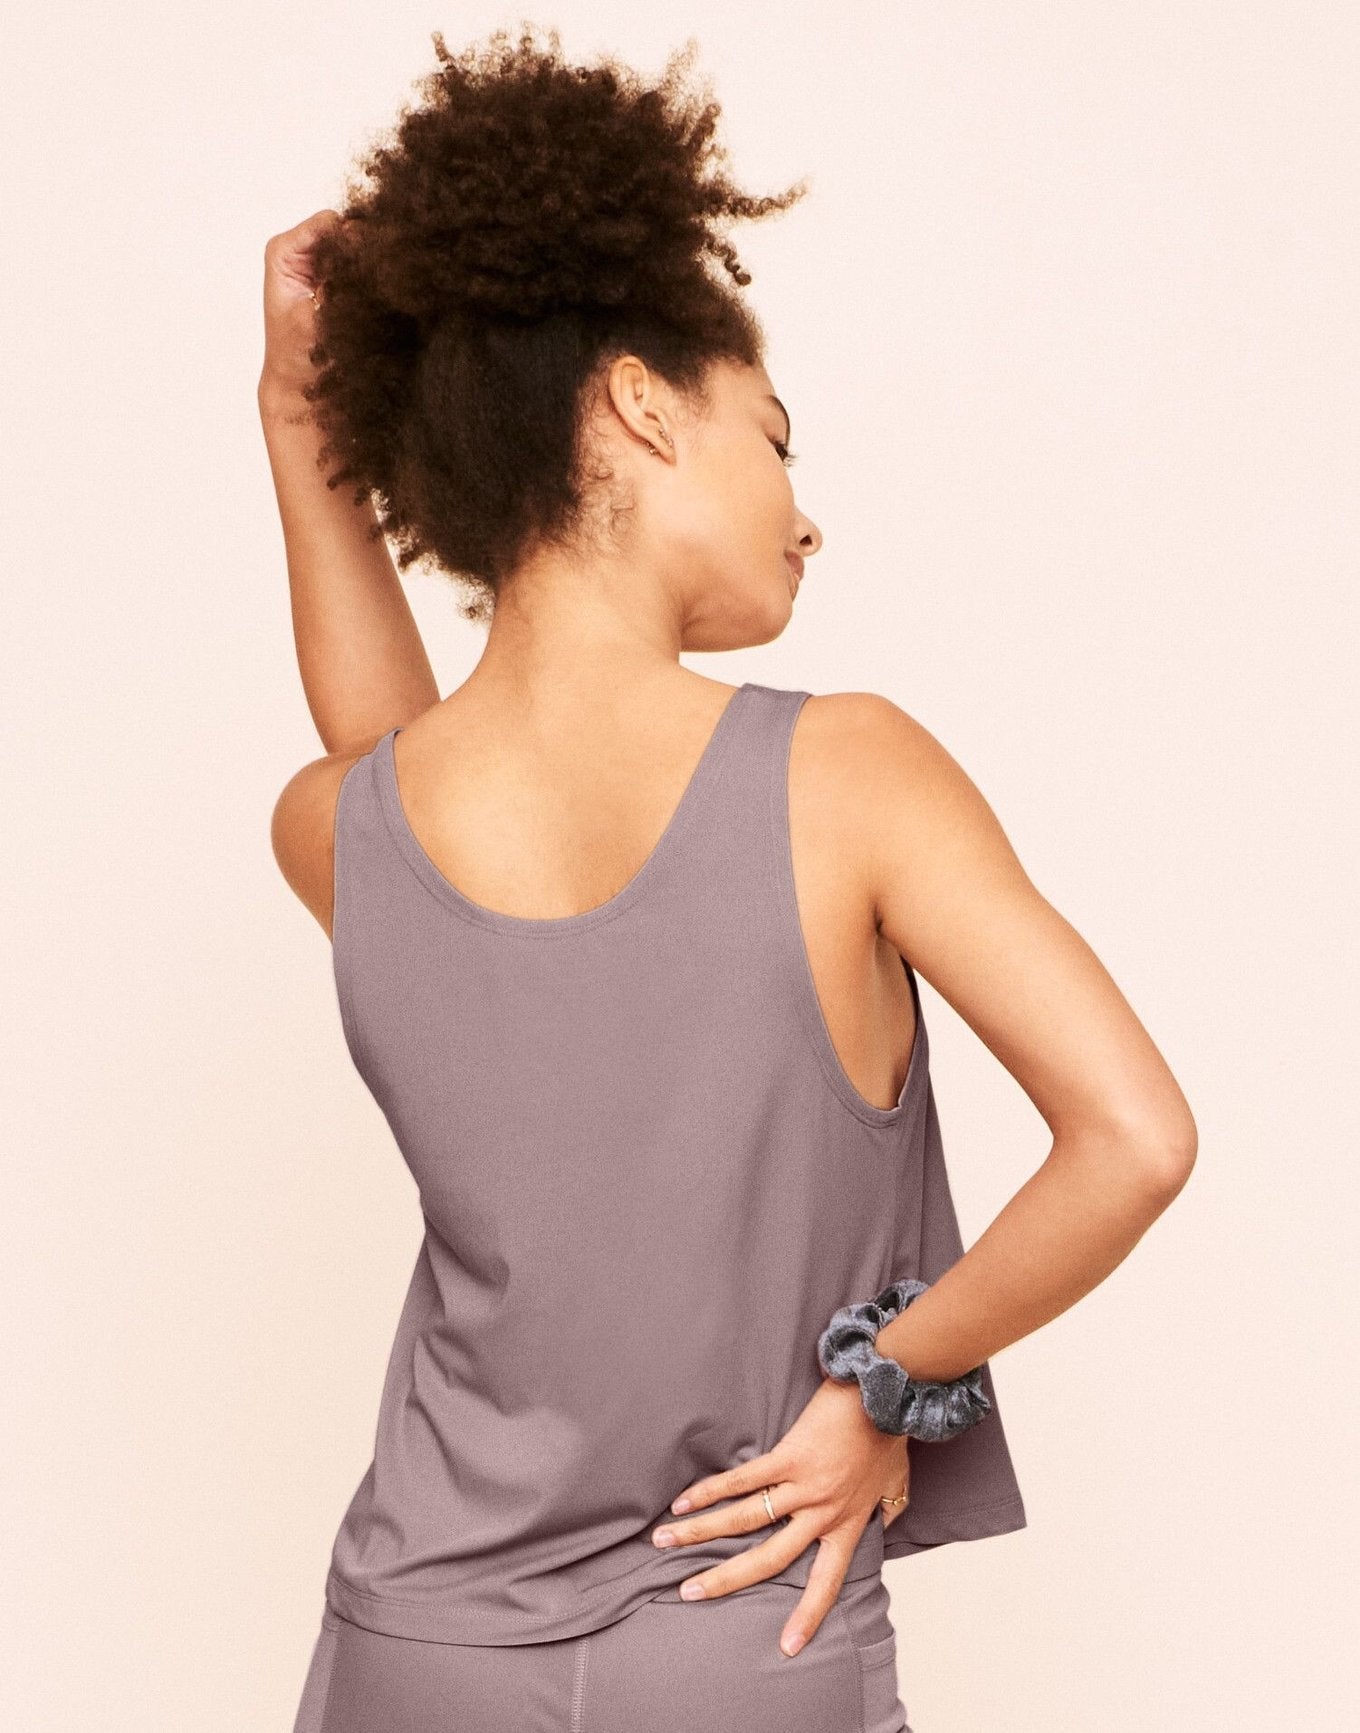 Earth Republic Micah Cropped Tank Cropped Tank in color Deauville Mauve and shape tank